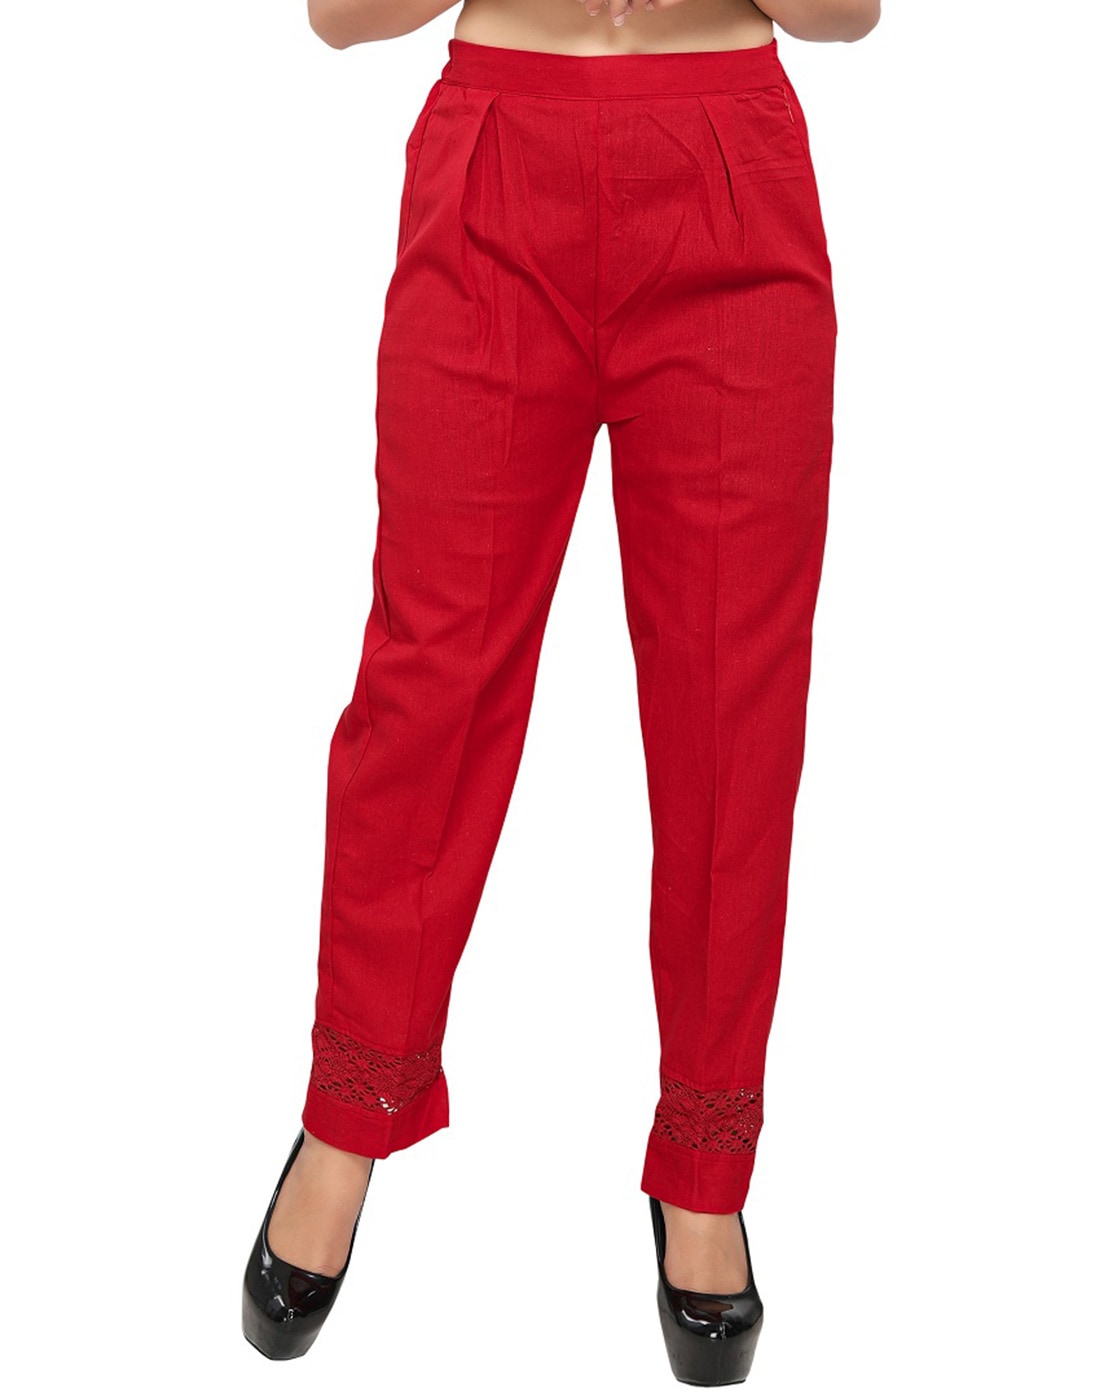 SUMAN CREATION Slim Fit Women Red Trousers  Buy SUMAN CREATION Slim Fit Women  Red Trousers Online at Best Prices in India  Flipkartcom  VIBRANT CONTEST